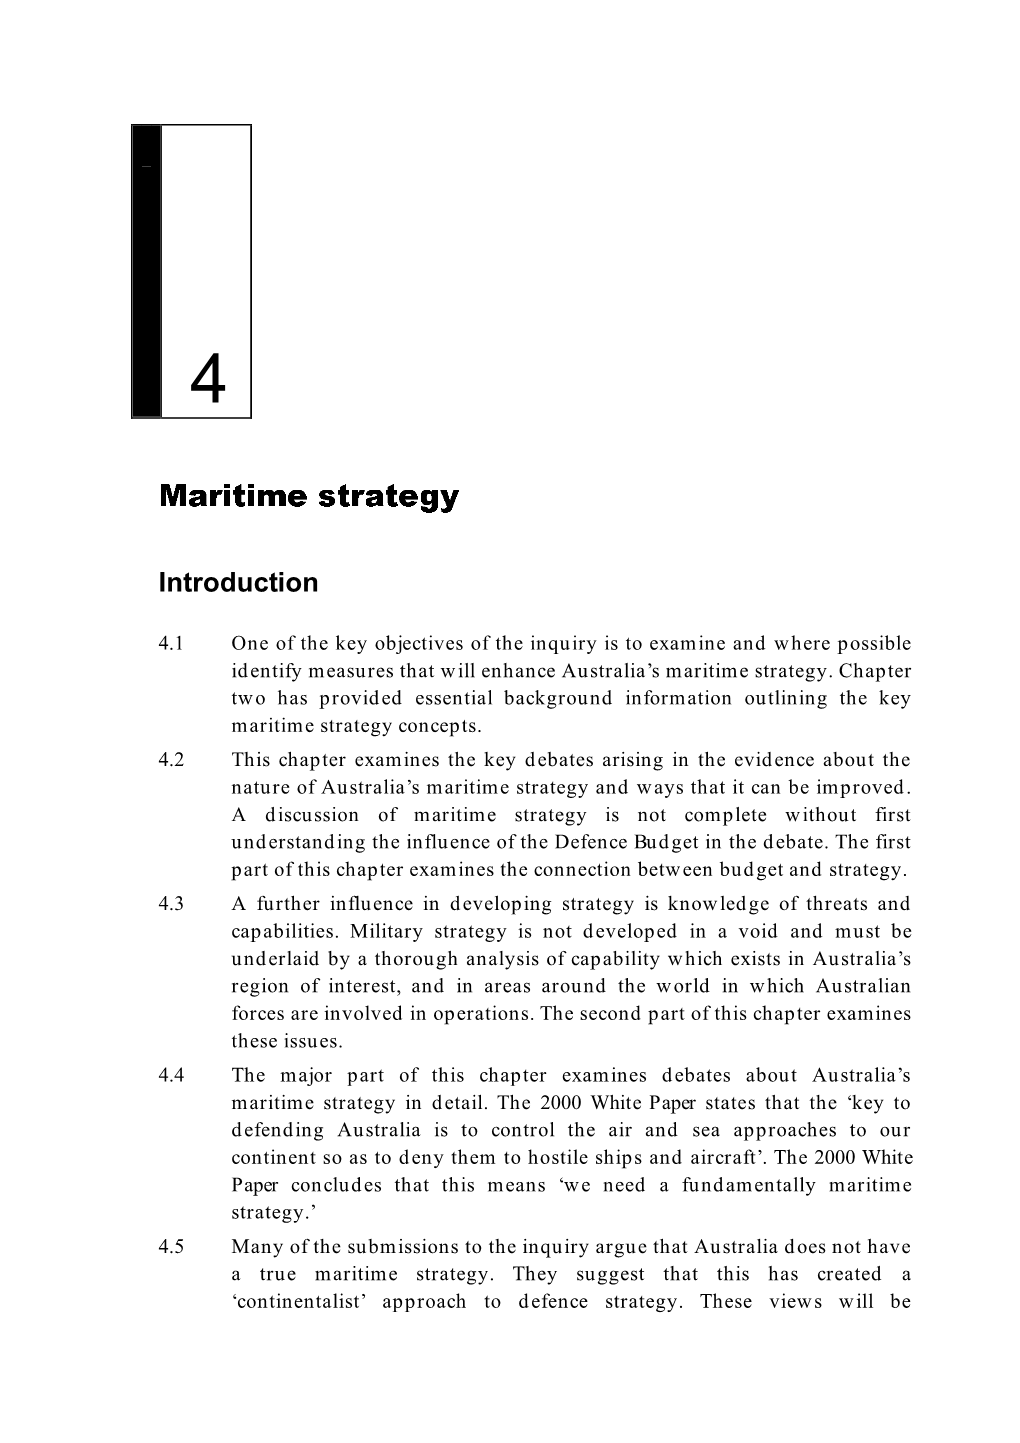 Chapter 4: Maritime Strategy